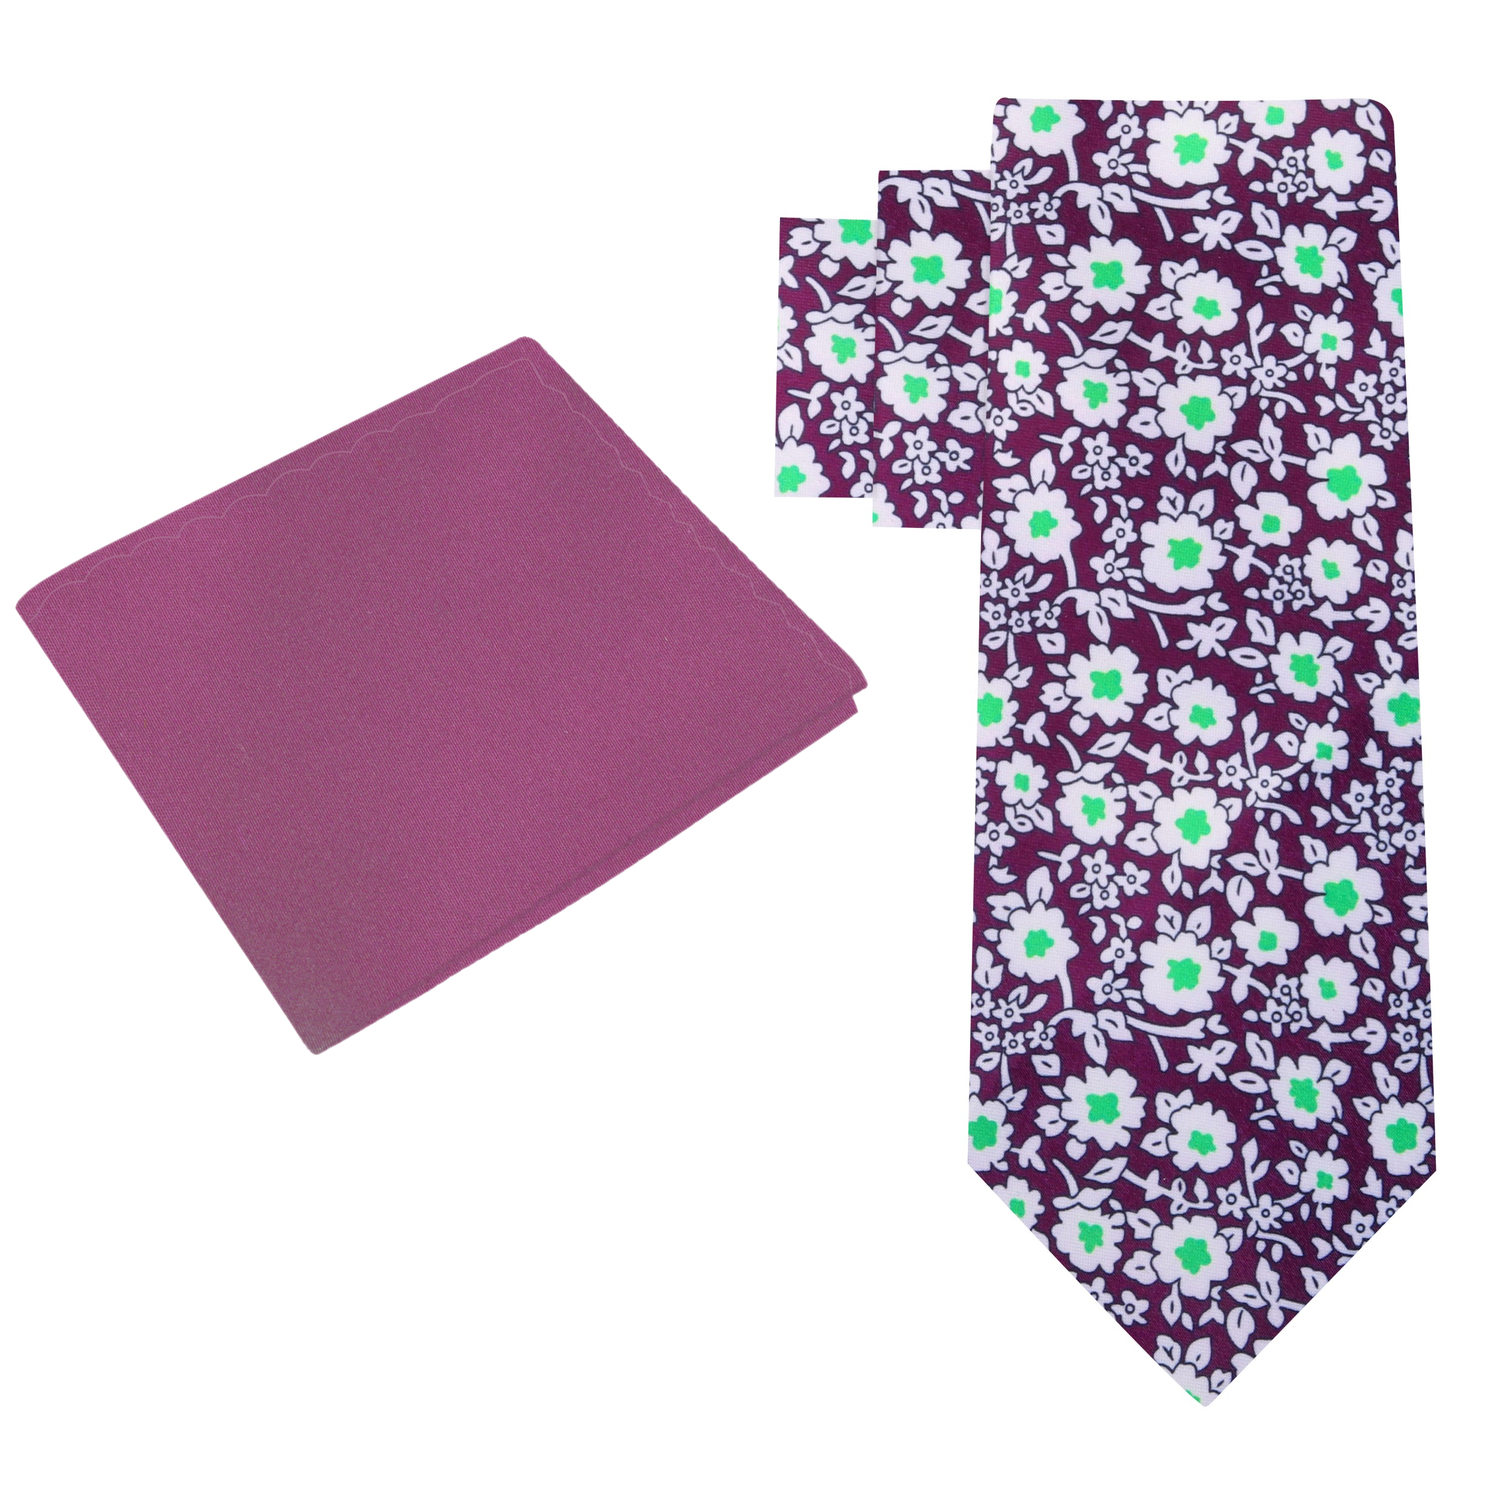 Alt View: Purple White Green Small Flowers Tie and Rich Purple Square 